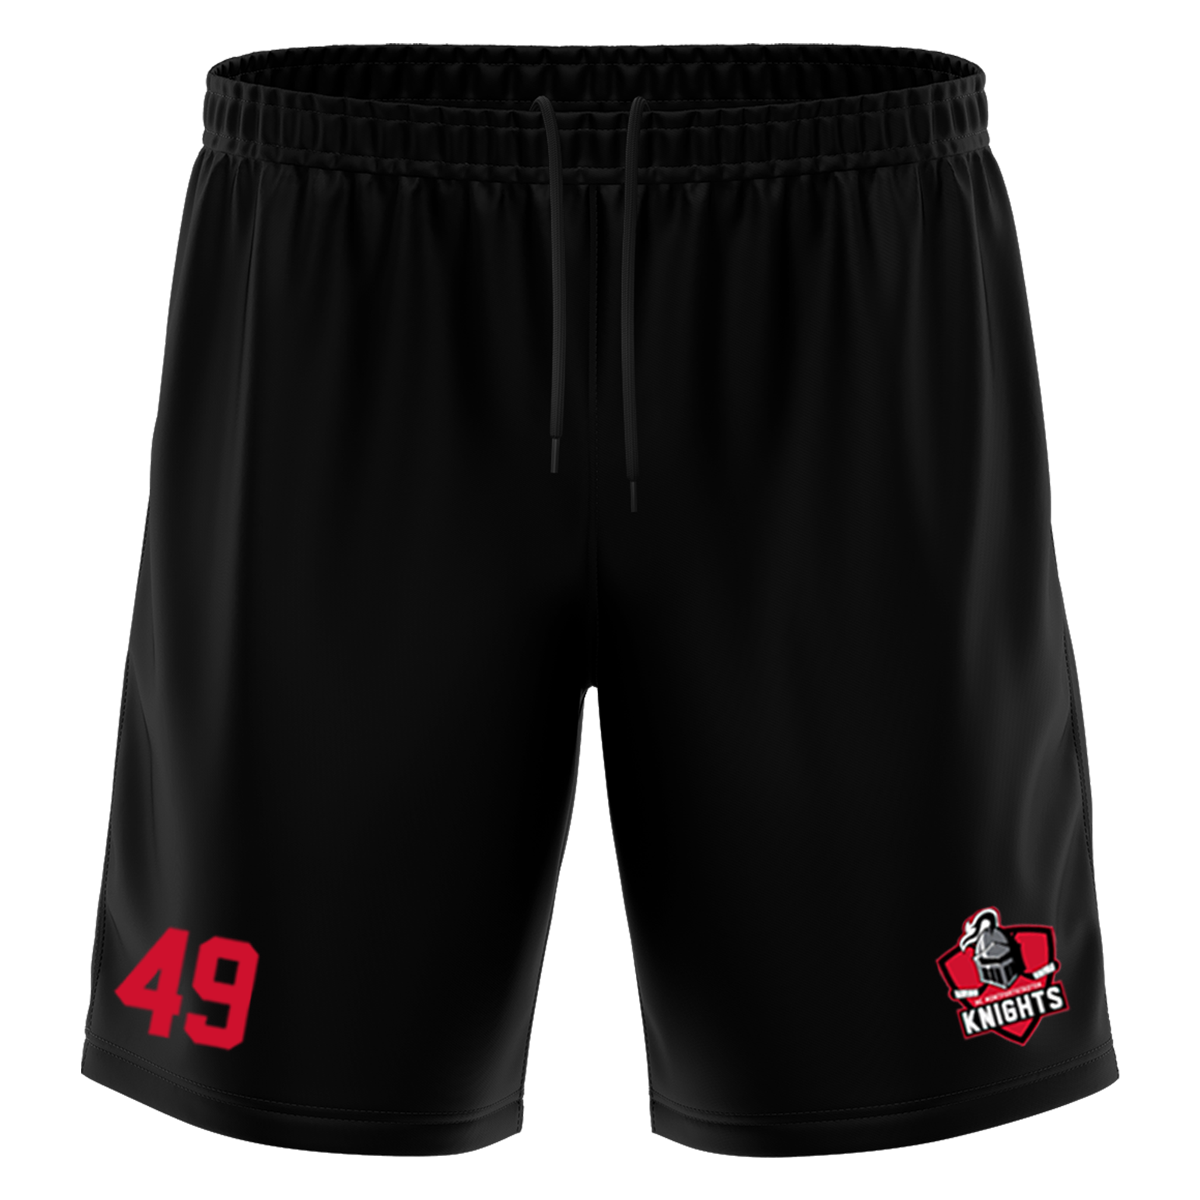 HCK Training Short with Playernumber or Initials